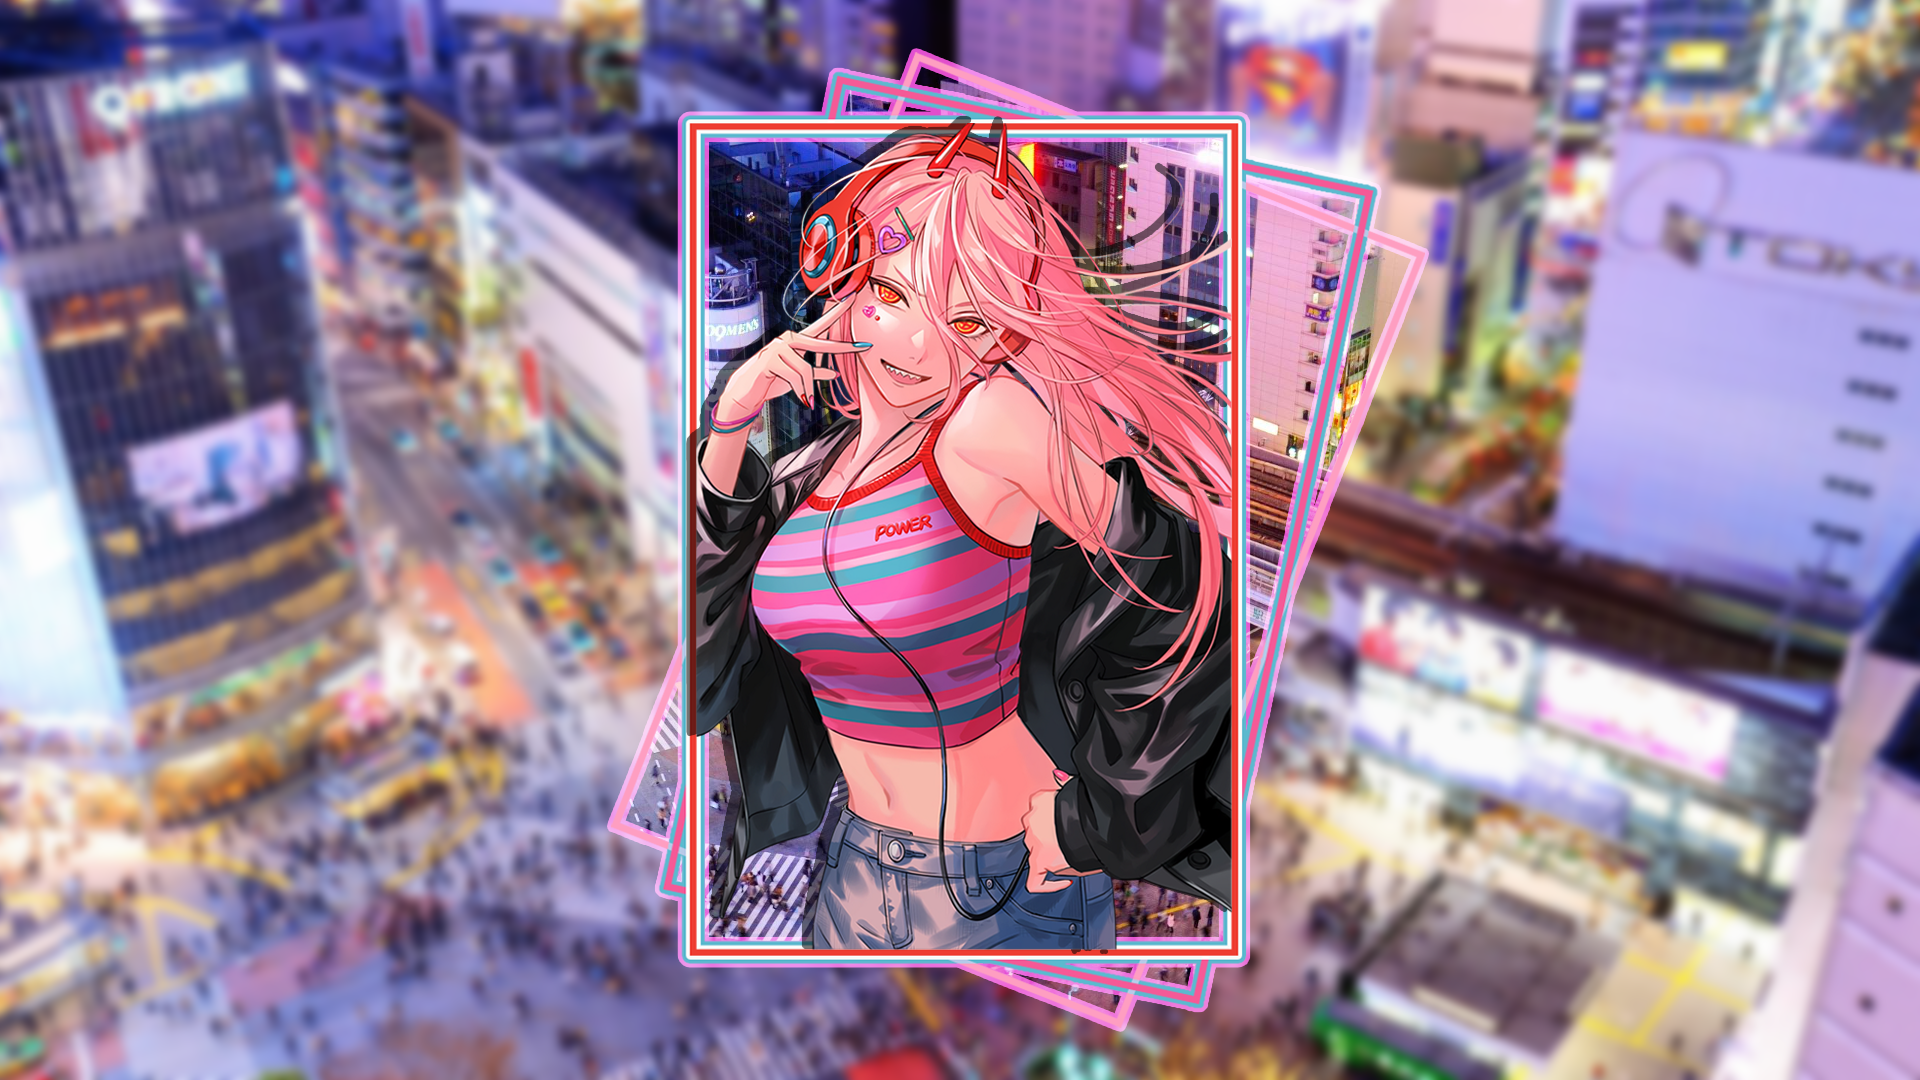 Picture In Picture Anime Girls Japan City Shibuya Chainsaw Man Power Chainsaw Man Headphones Pink Ha 1920x1080